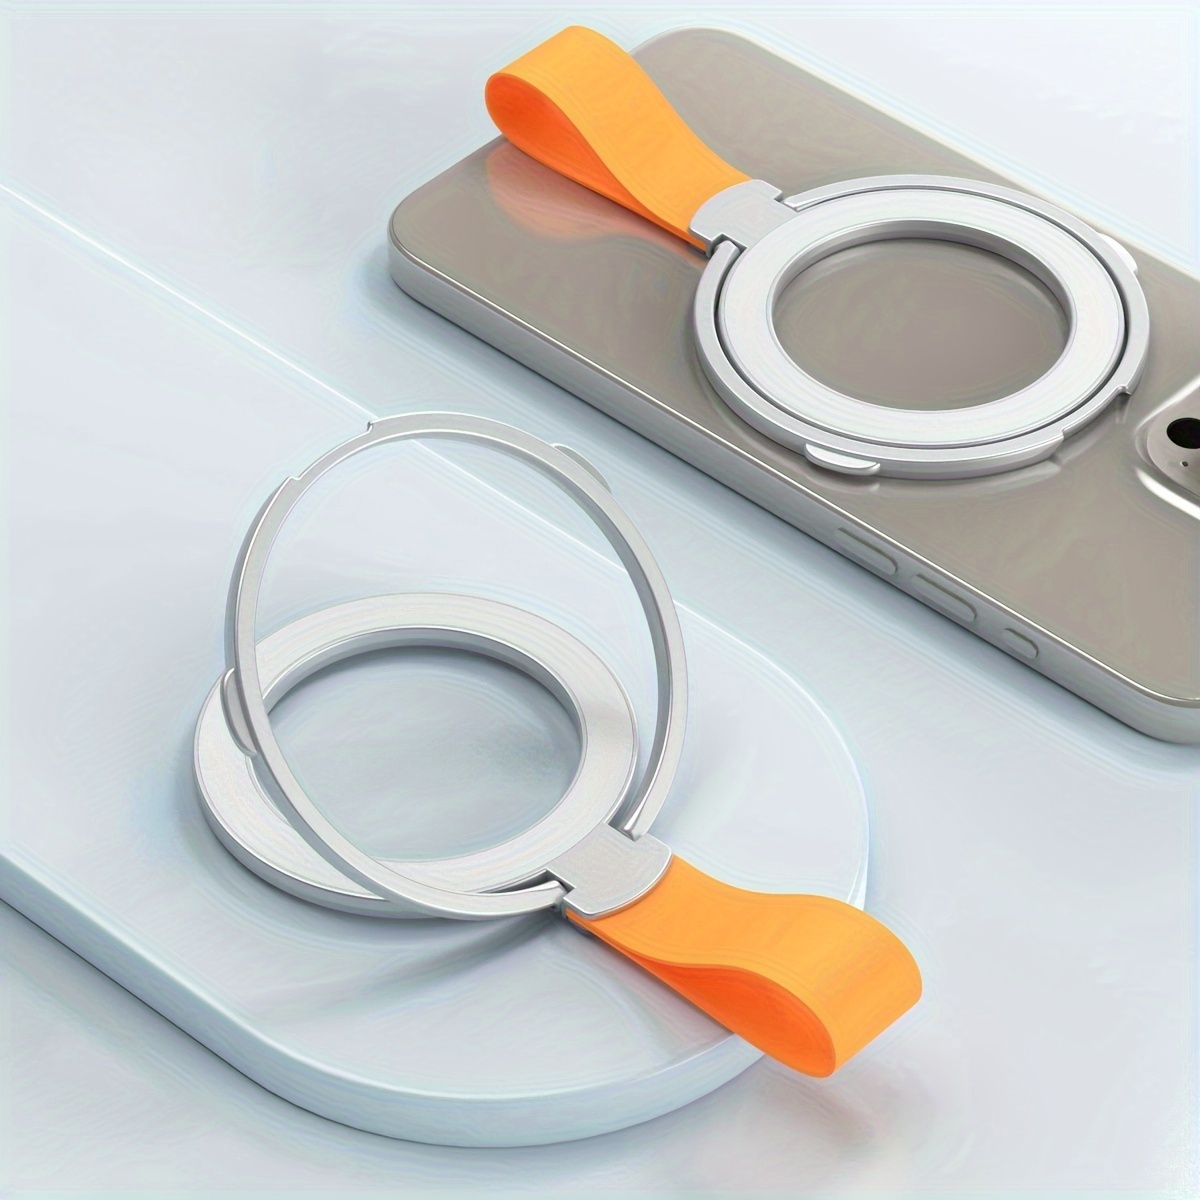  Lamicall Magnetic Phone Ring Holder for MagSafe